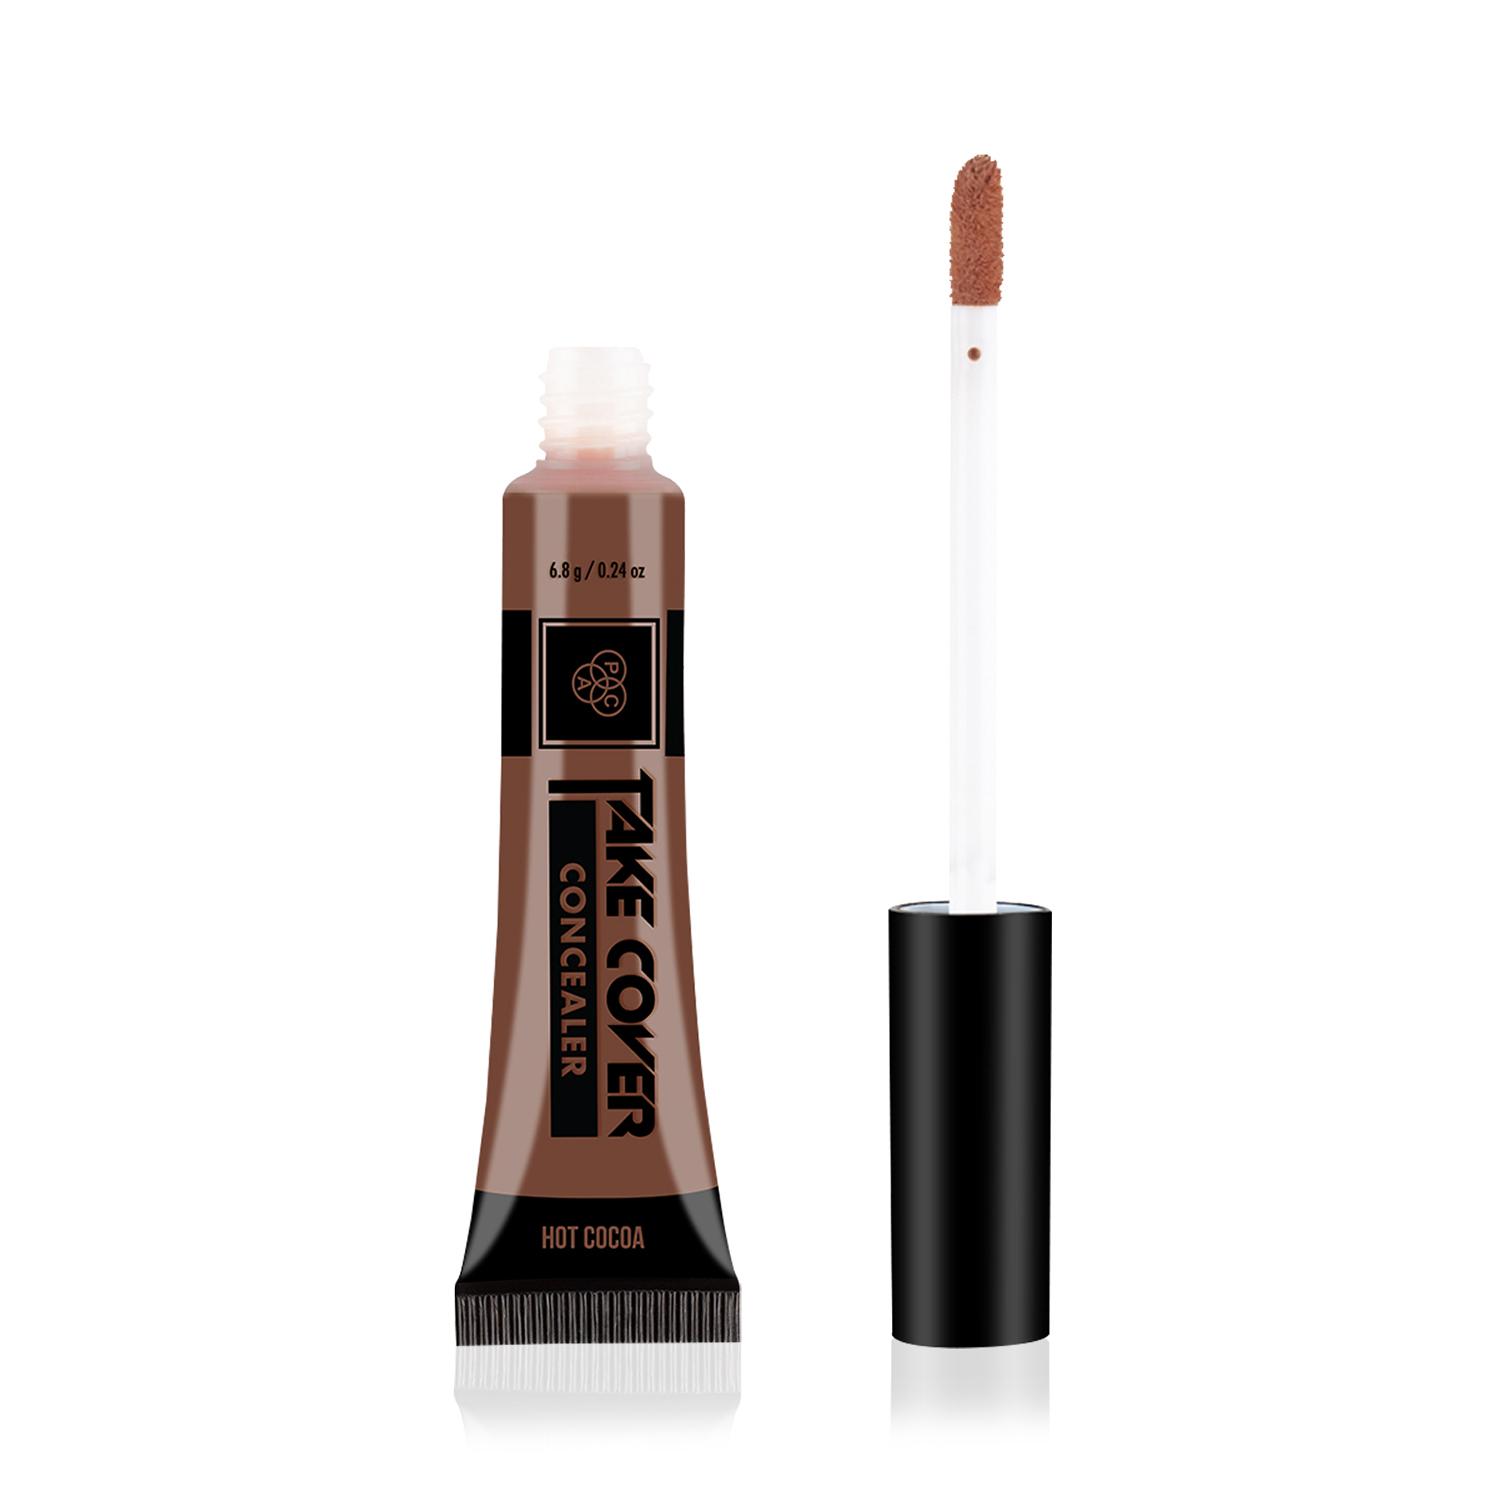 PAC | PAC Take Cover Concealer - 18 Hot Cocoa (6.8g)